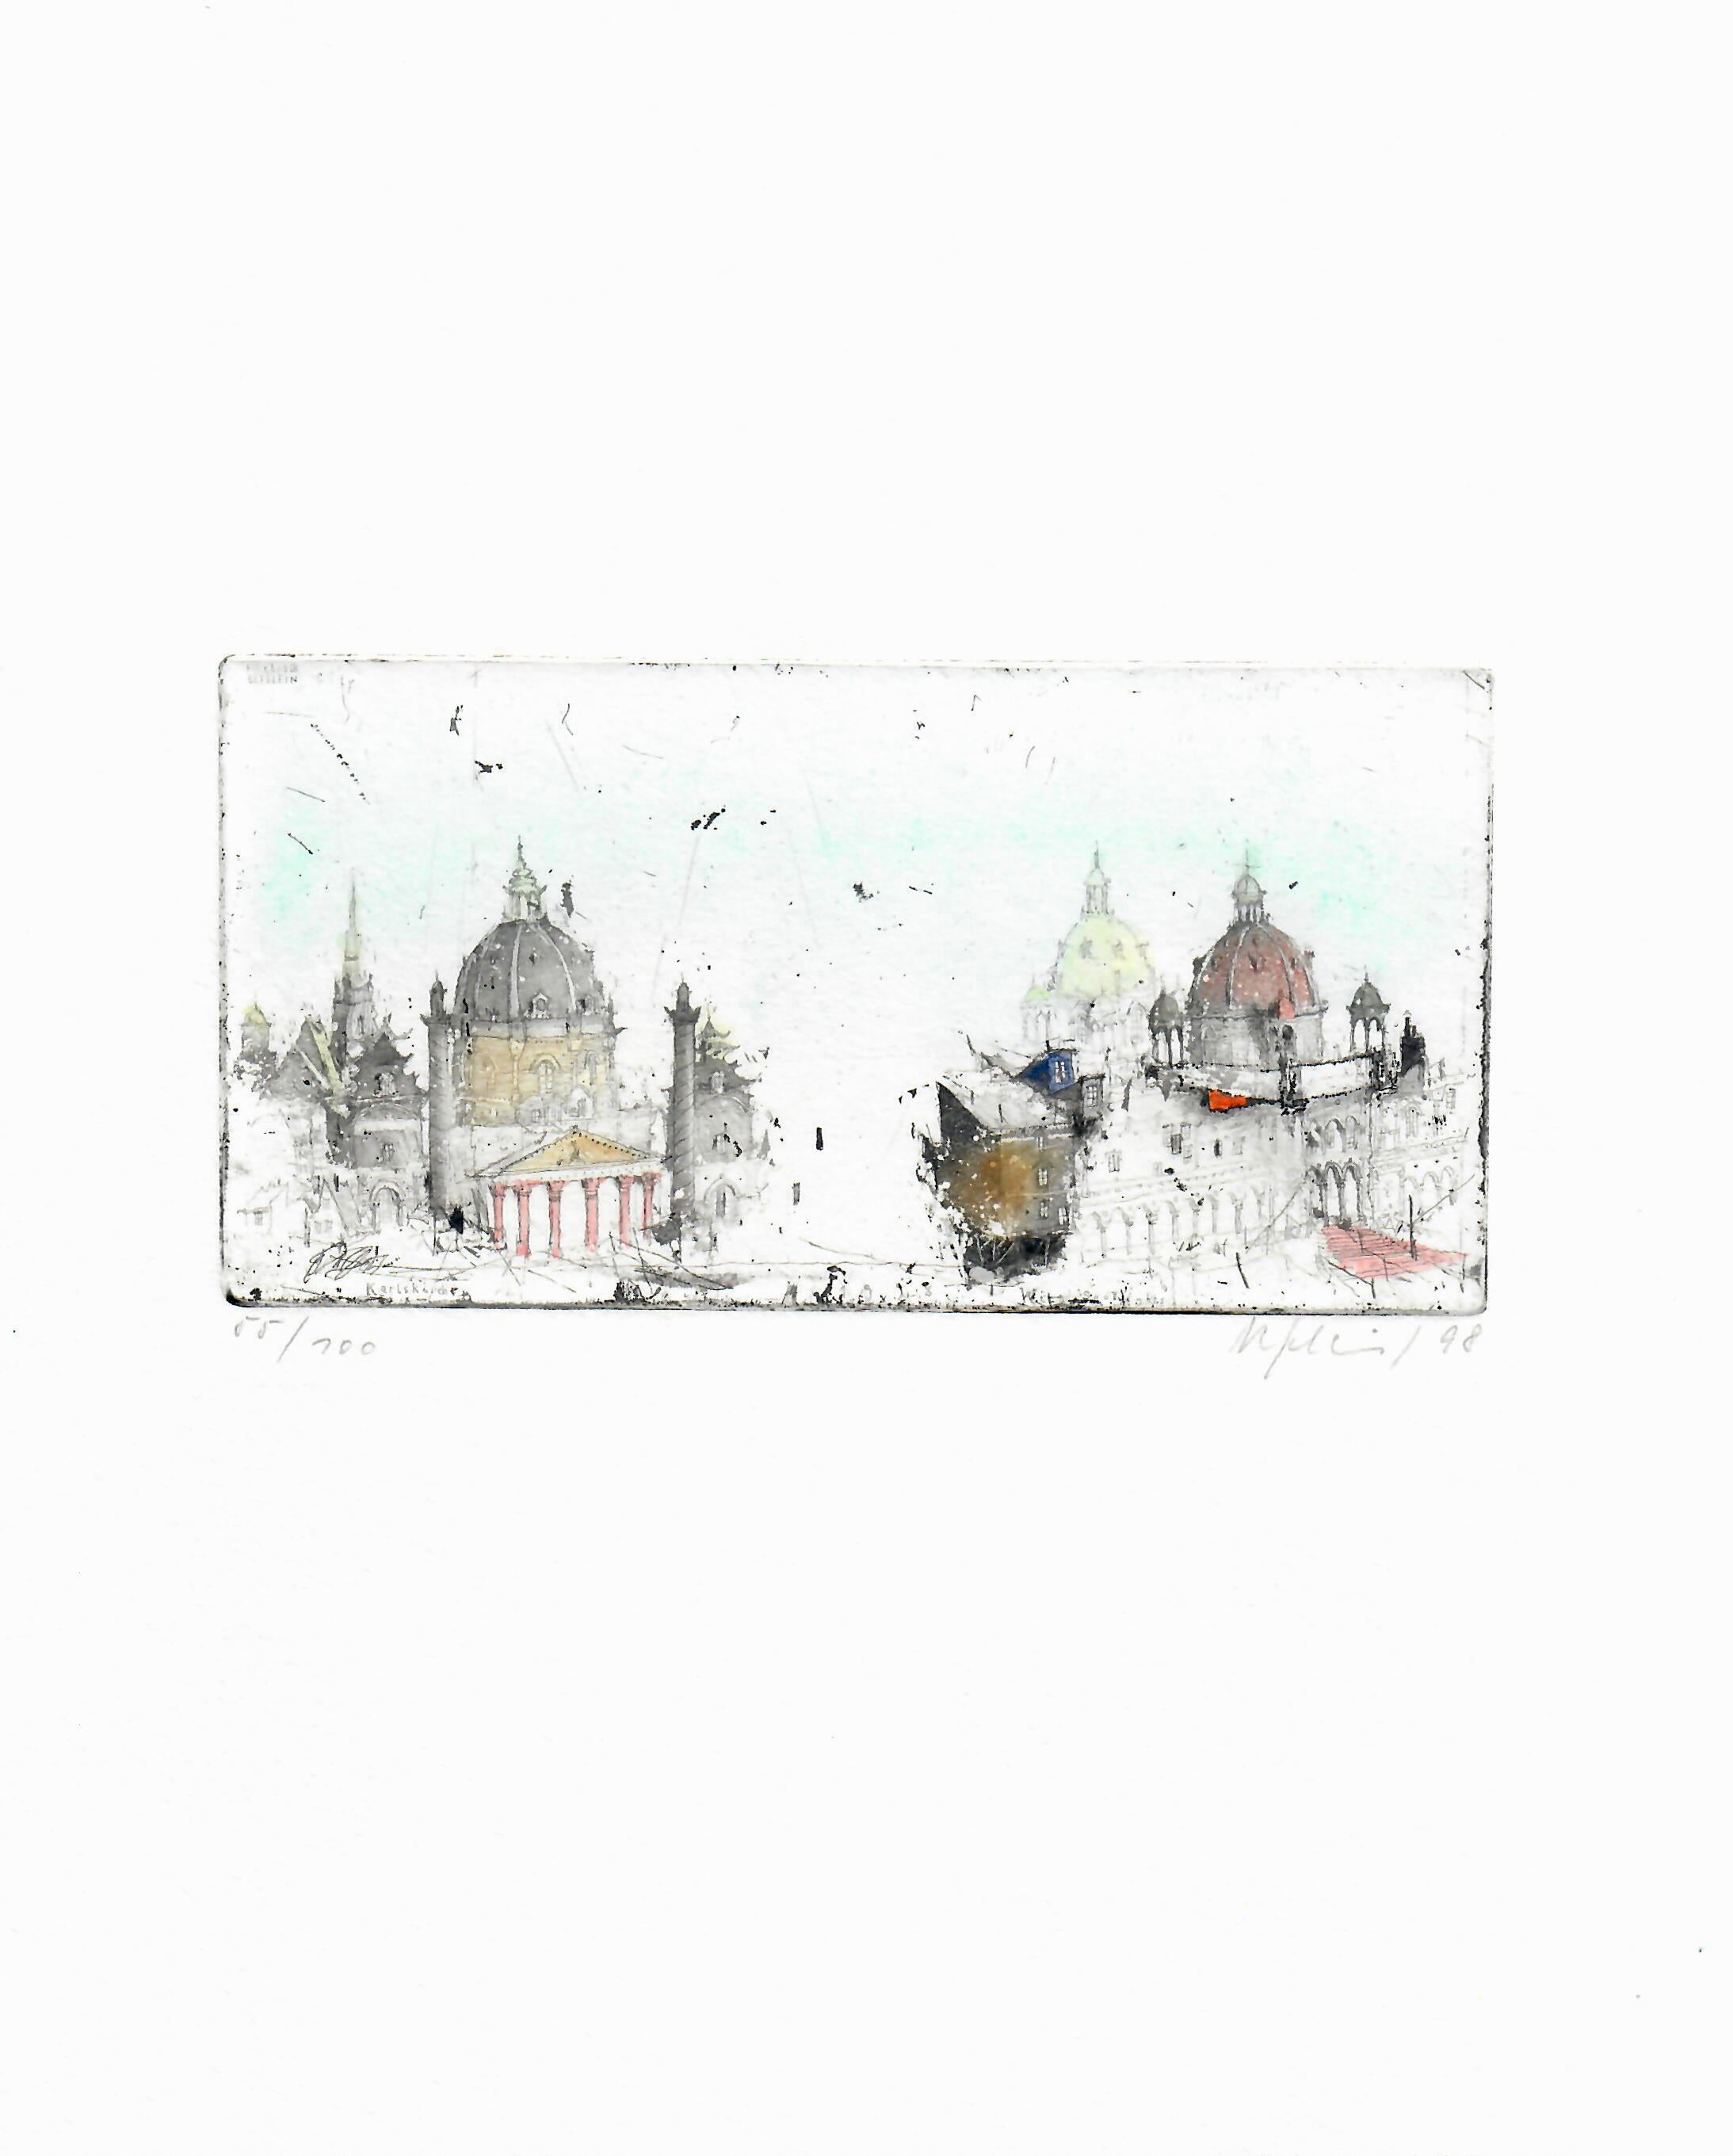 'Wien, Austria' by Alexander Befelein- beautiful contemporary limited edition print of the city architecture in Wien, Austria. A graphic miniature etching has many layers of details - it's the best choice for small interiors. The print looks like a